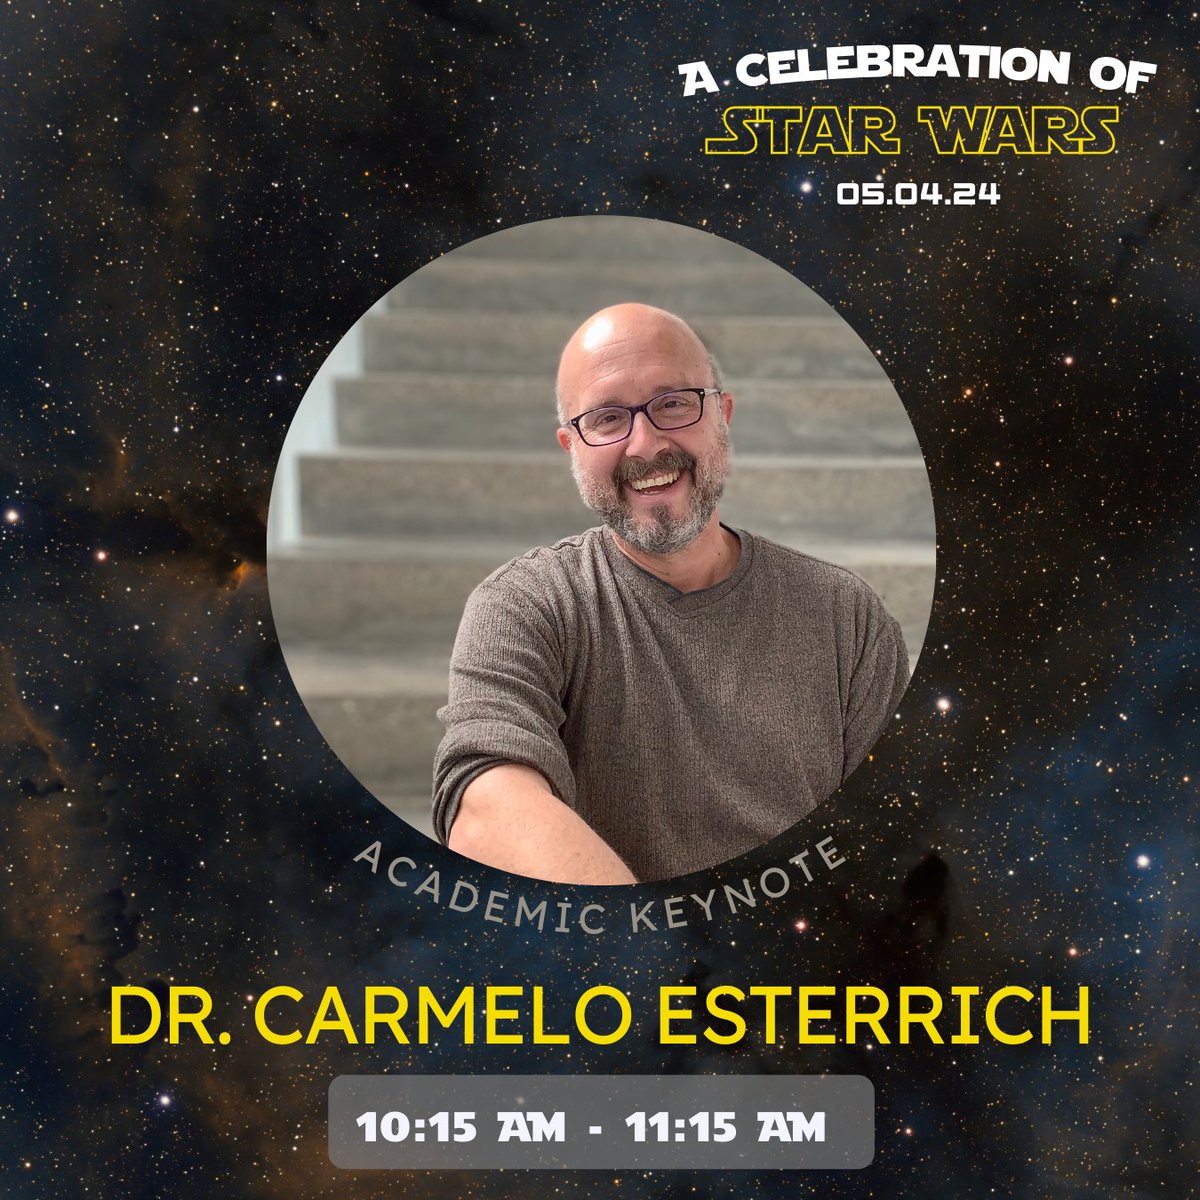 We’re so pleased to welcome Dr. Carmelo Esterrich, Columbia College-Chicago as our Academic Keynote Speaker this year! The keynote presentation will be offered in-person in Room 805 & online from 10:15 am - 11:15 am.